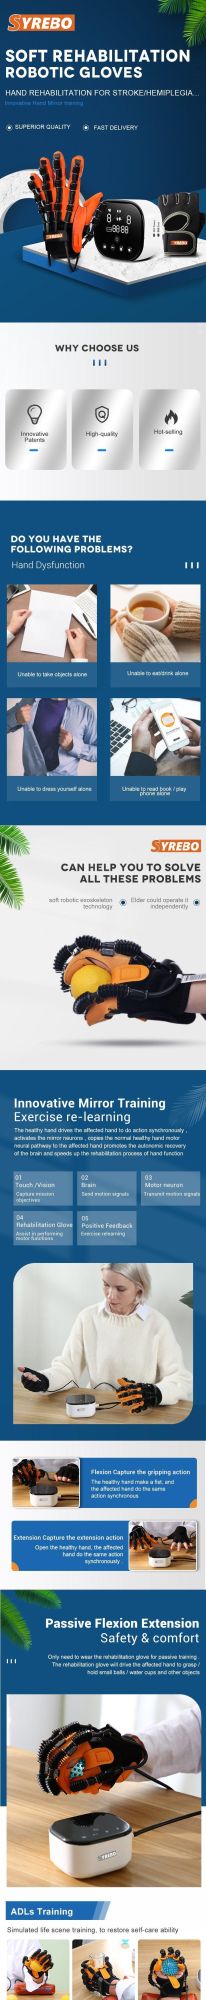 Hand Gloves Massager Stroke Hand Rehabilitation Robotic Hand Rehabilitation Products Multi-Functions in One Device